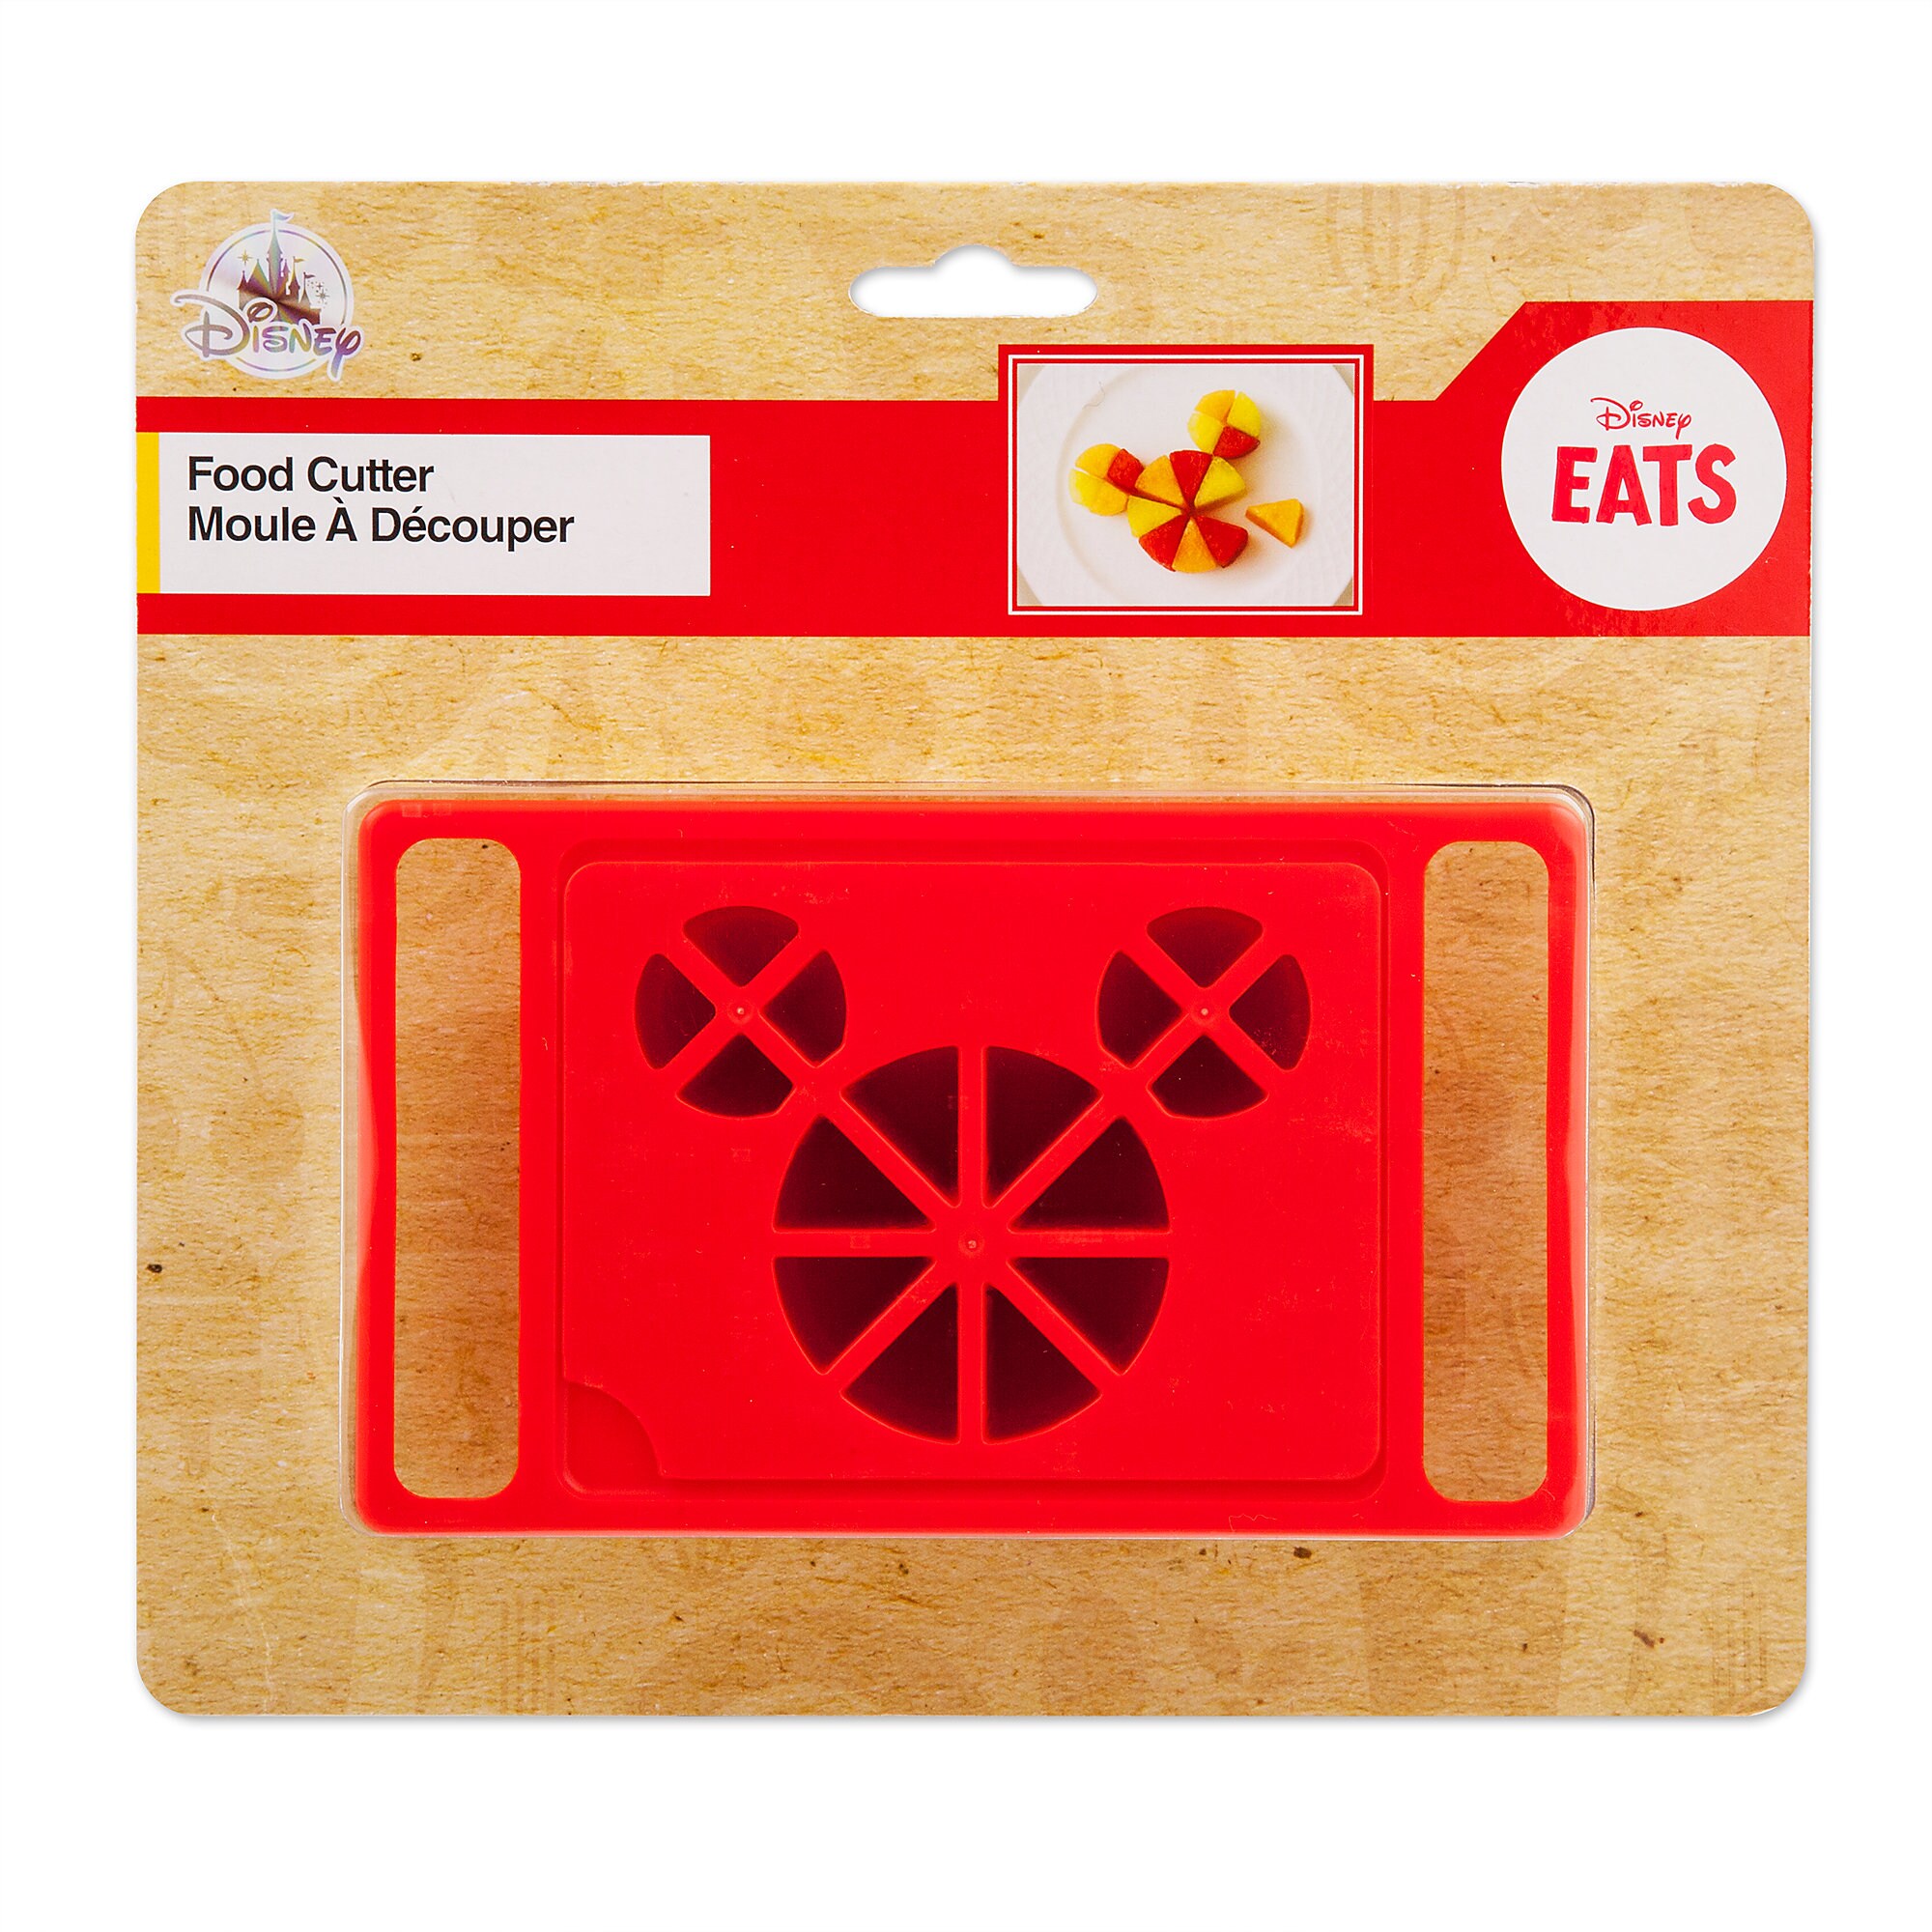 Mickey Mouse Food Cutter - Disney Eats